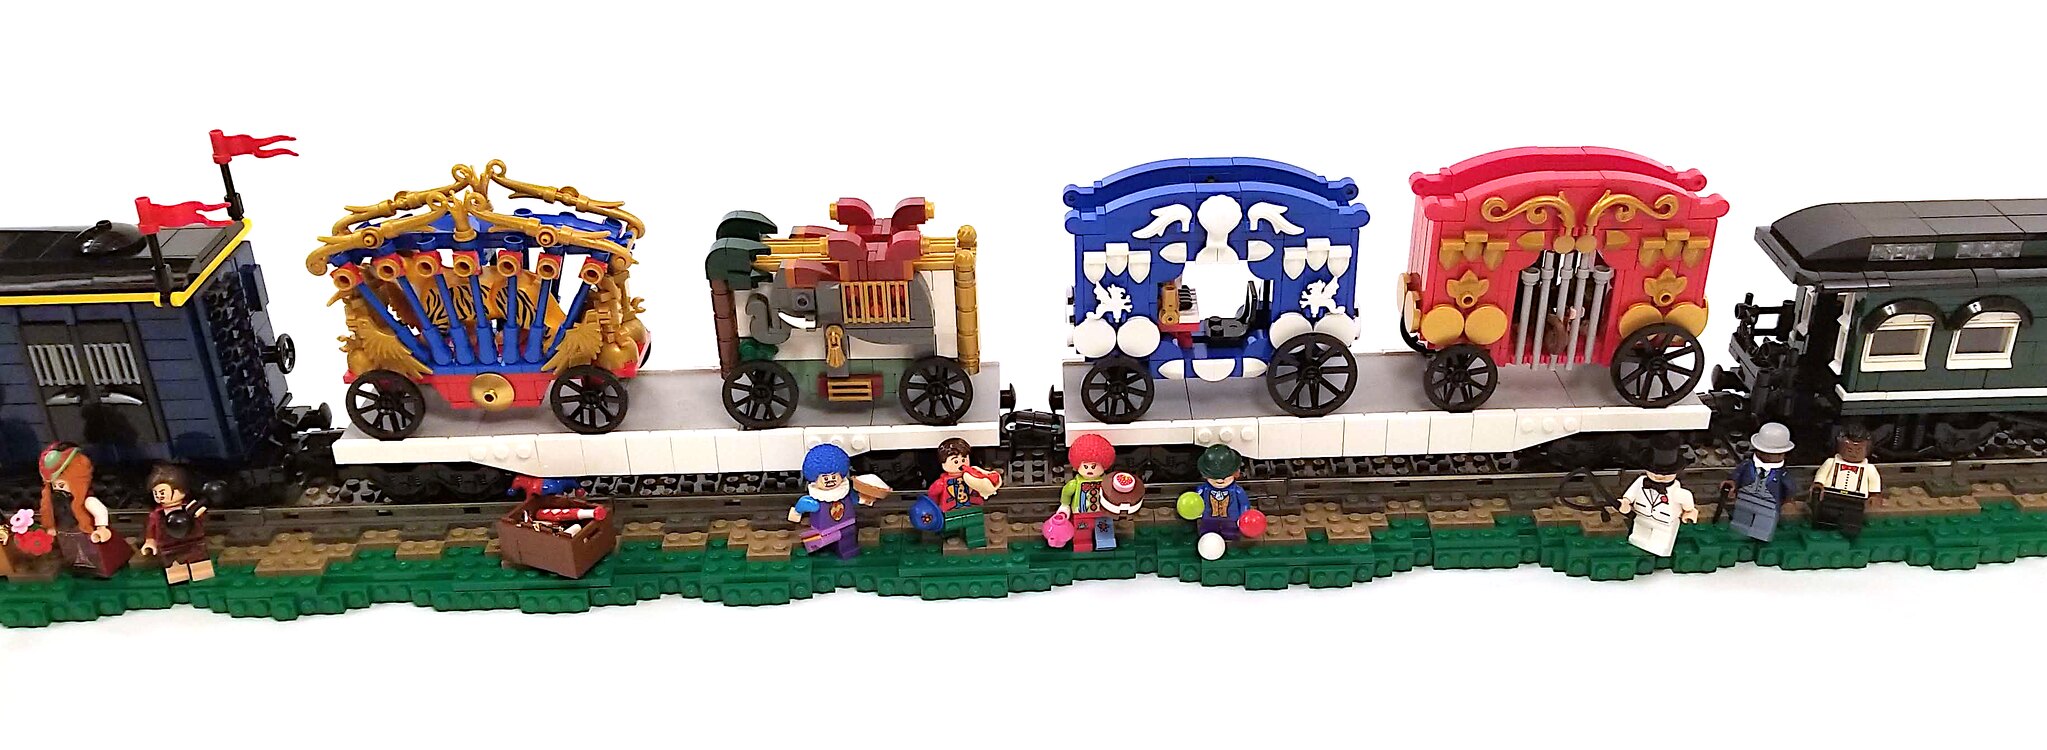 Steam into the with this whimsical train - The Brothers Brick | The Brick